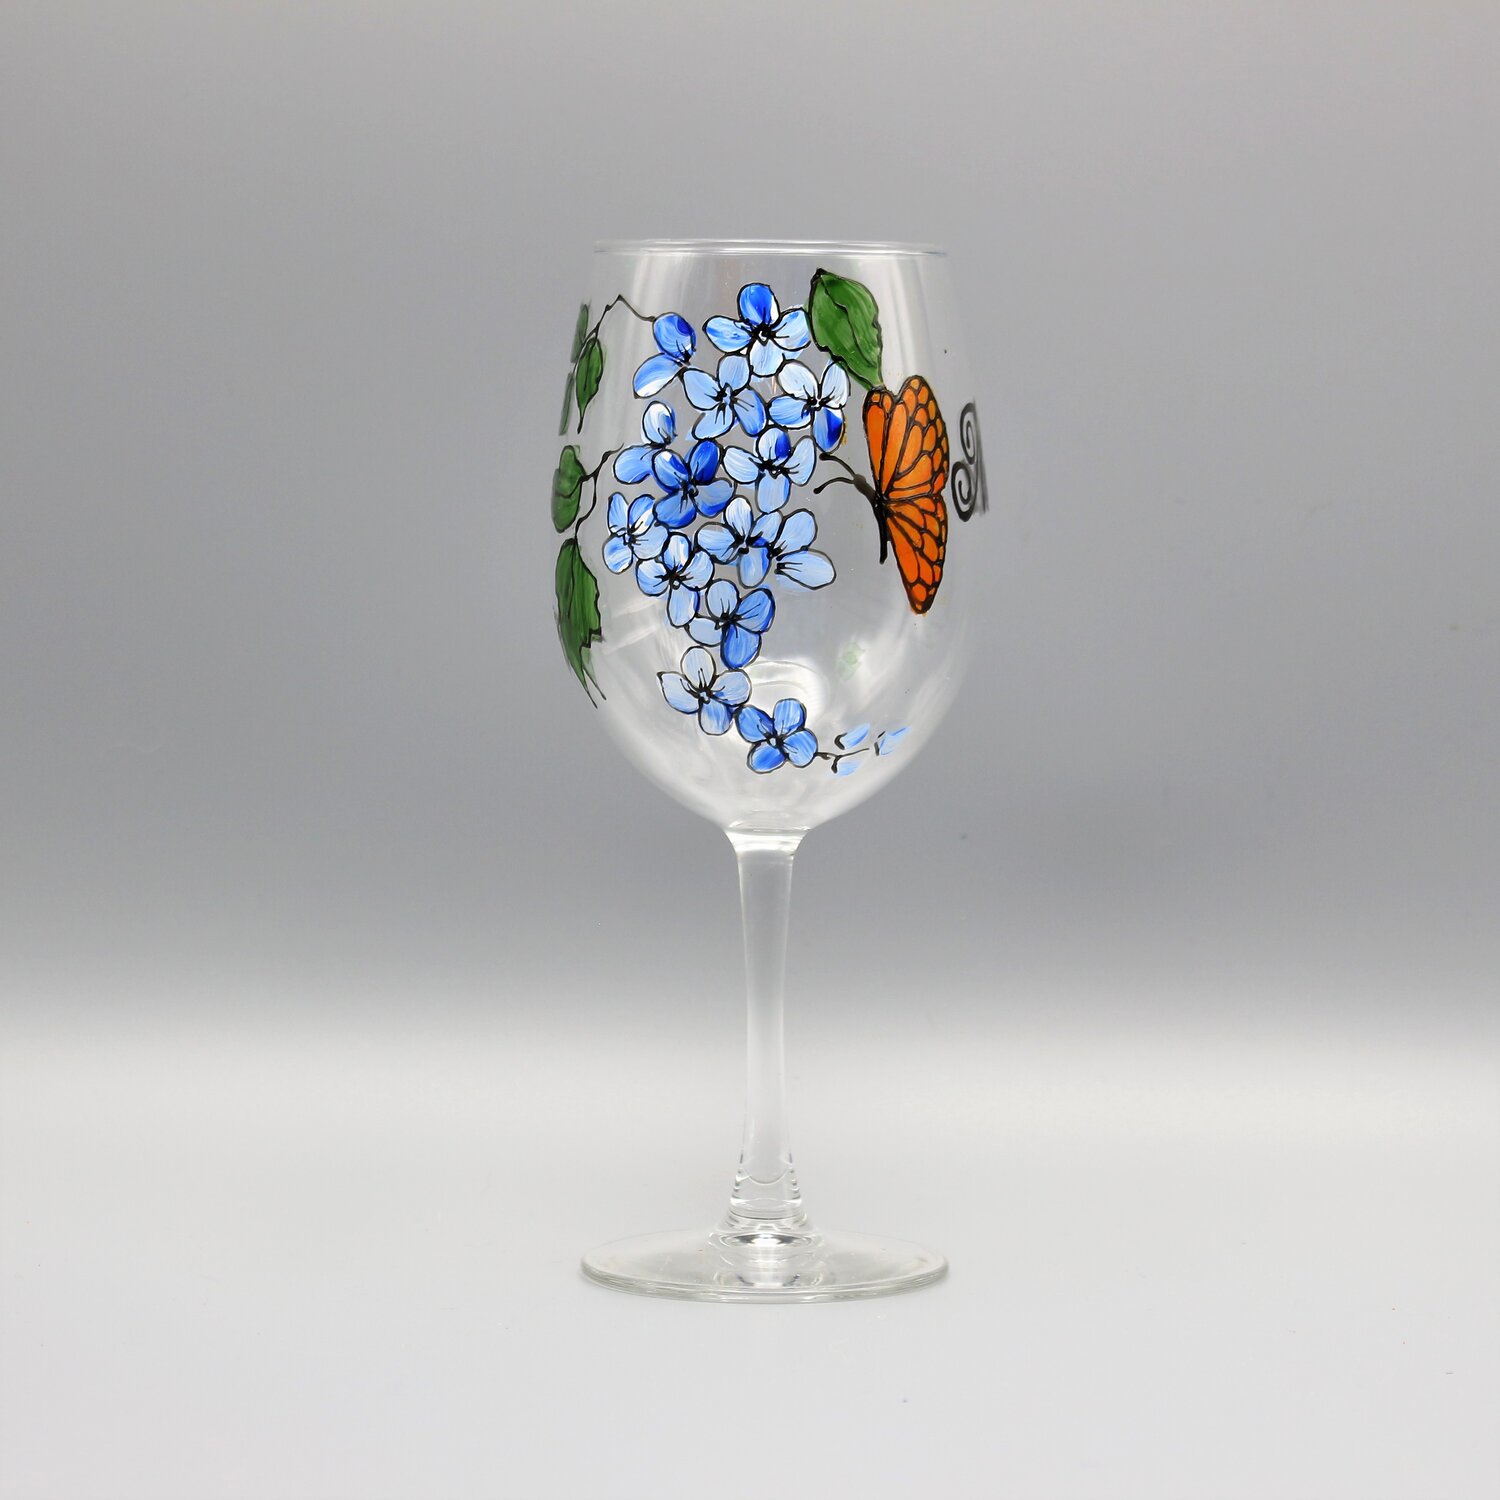 https://images.squarespace-cdn.com/content/v1/5570dc78e4b0bbe8e5cab3d0/1580176074241-I3URZ1ND56HY7ZYIP7JT/butterfly_and_flower_wine_glass_blue.JPG?format=1500w